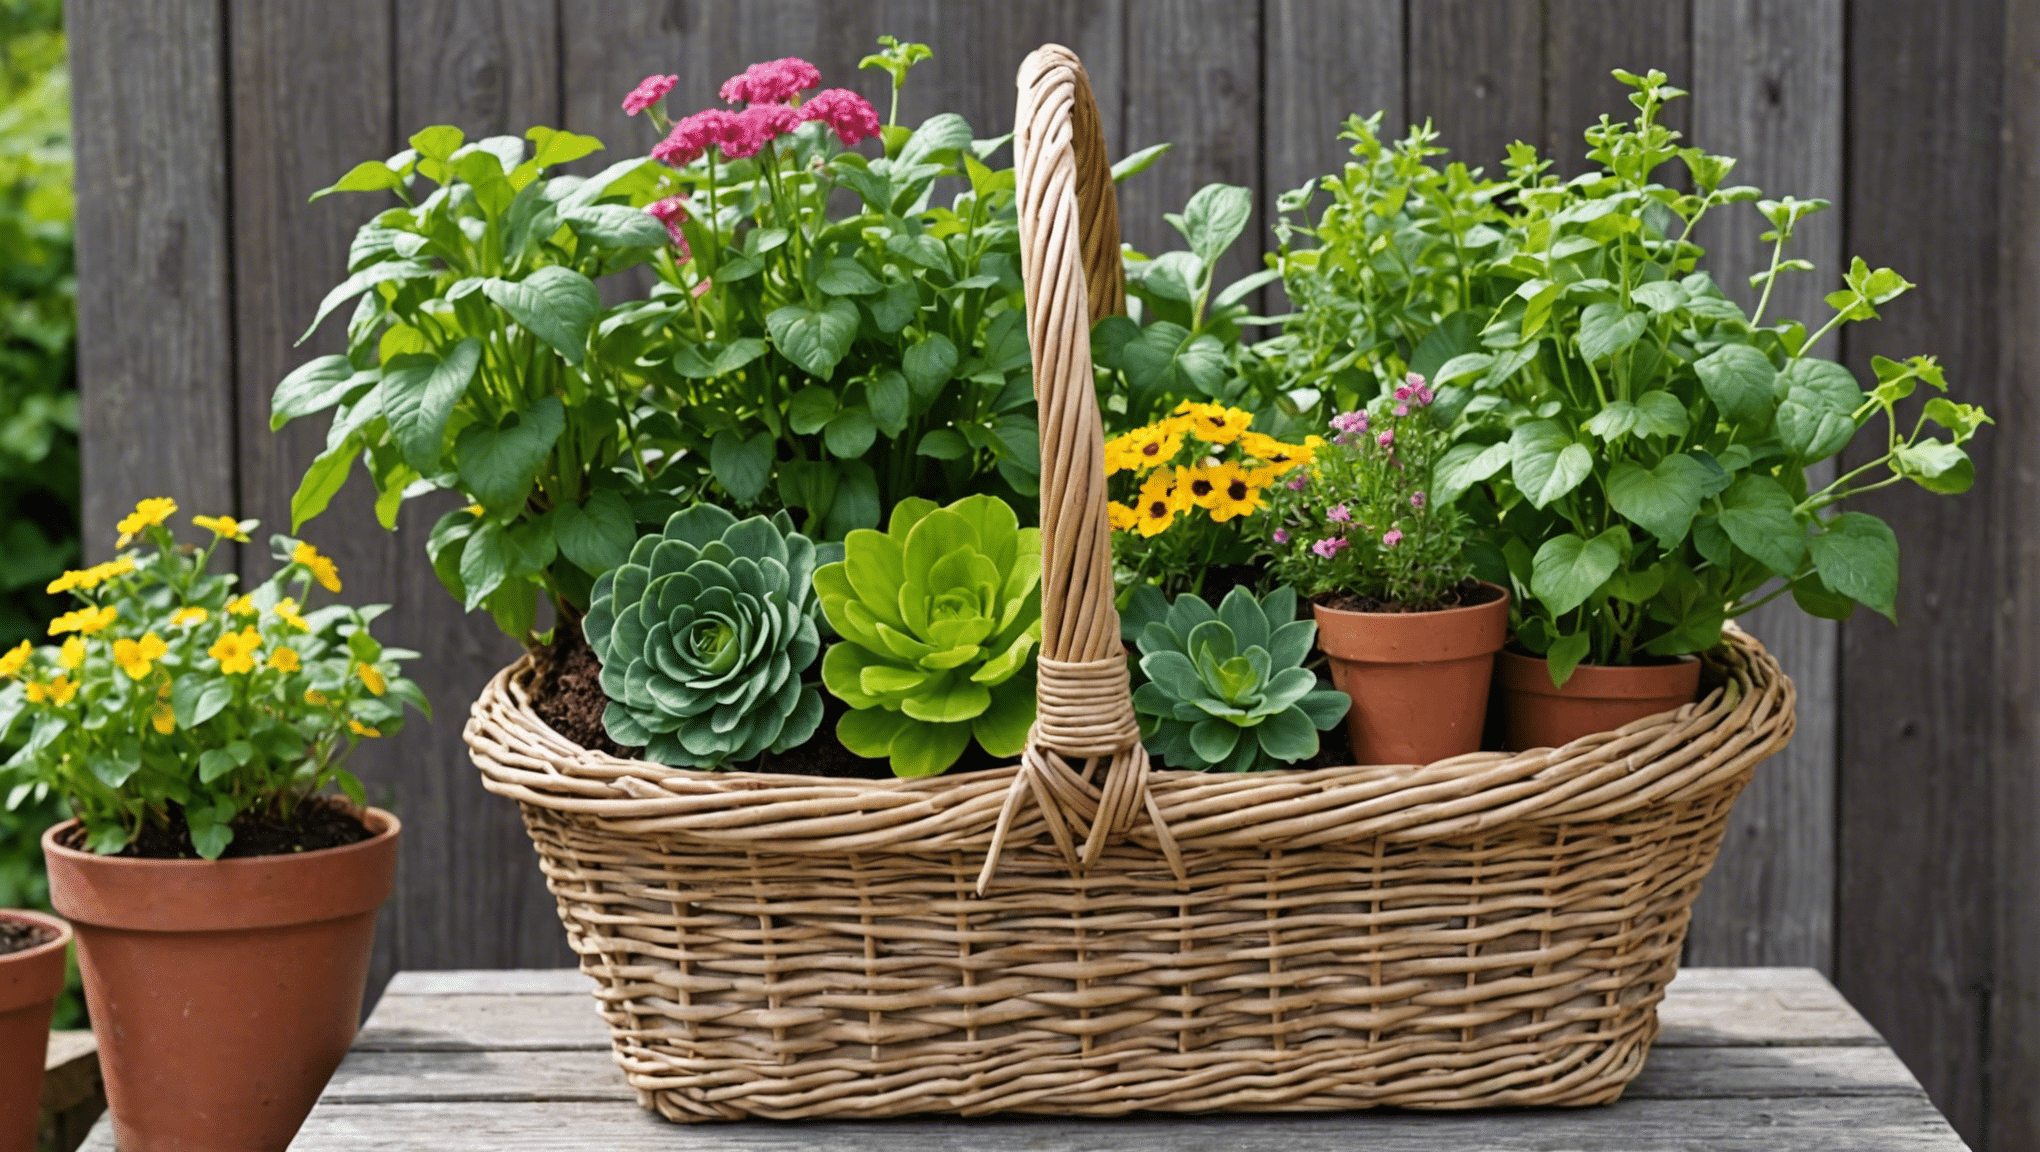 discover the must-have items for your gardening basket and turn your gardening experience into a breeze with our comprehensive guide.